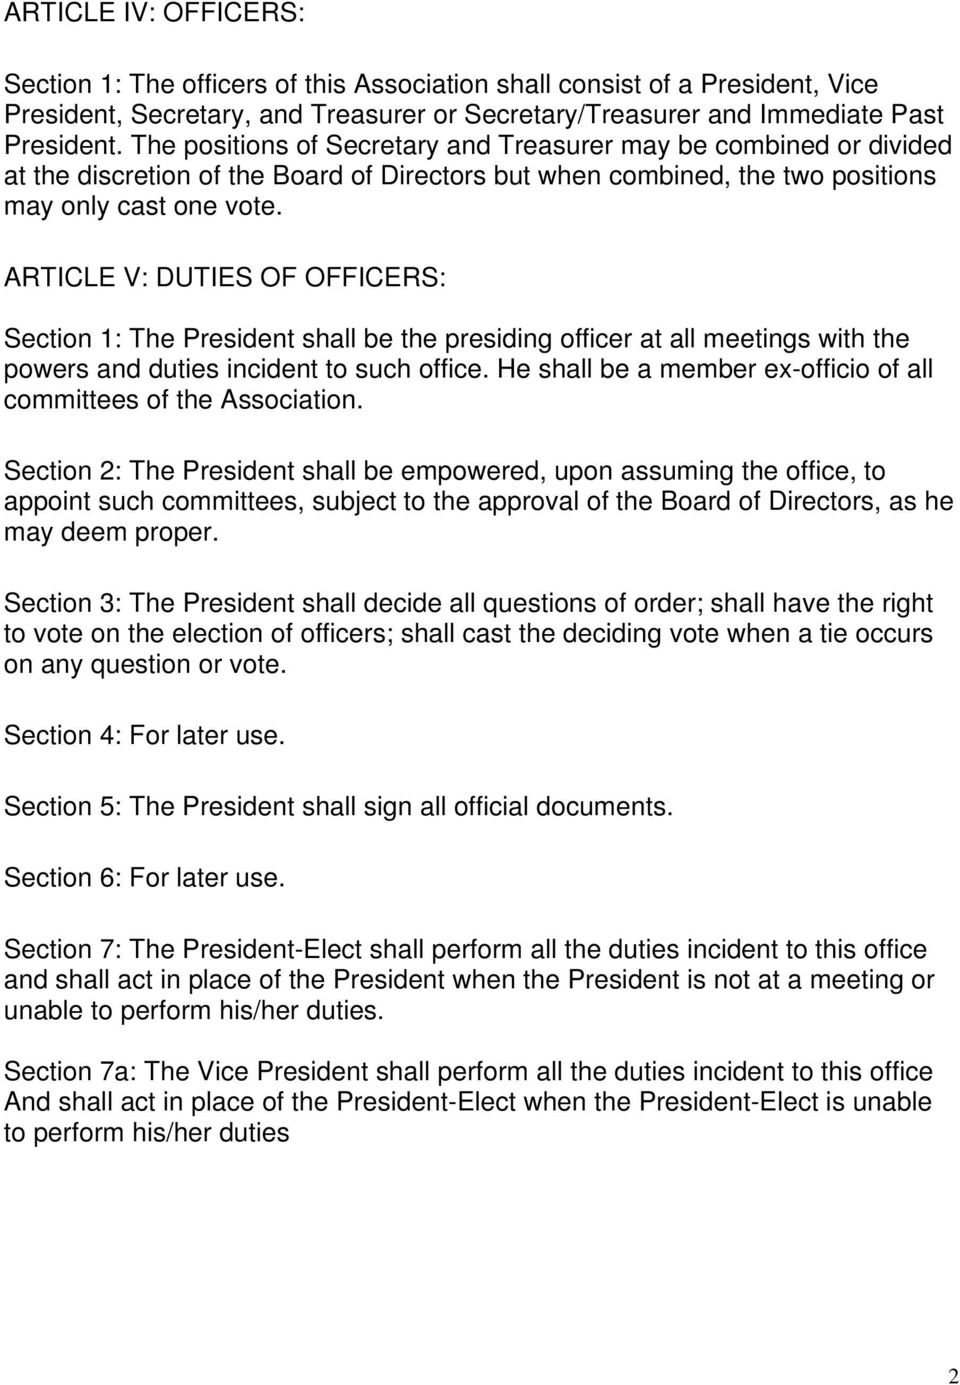 ARTICLE V: DUTIES OF OFFICERS: Section 1: The President shall be the presiding officer at all meetings with the powers and duties incident to such office.